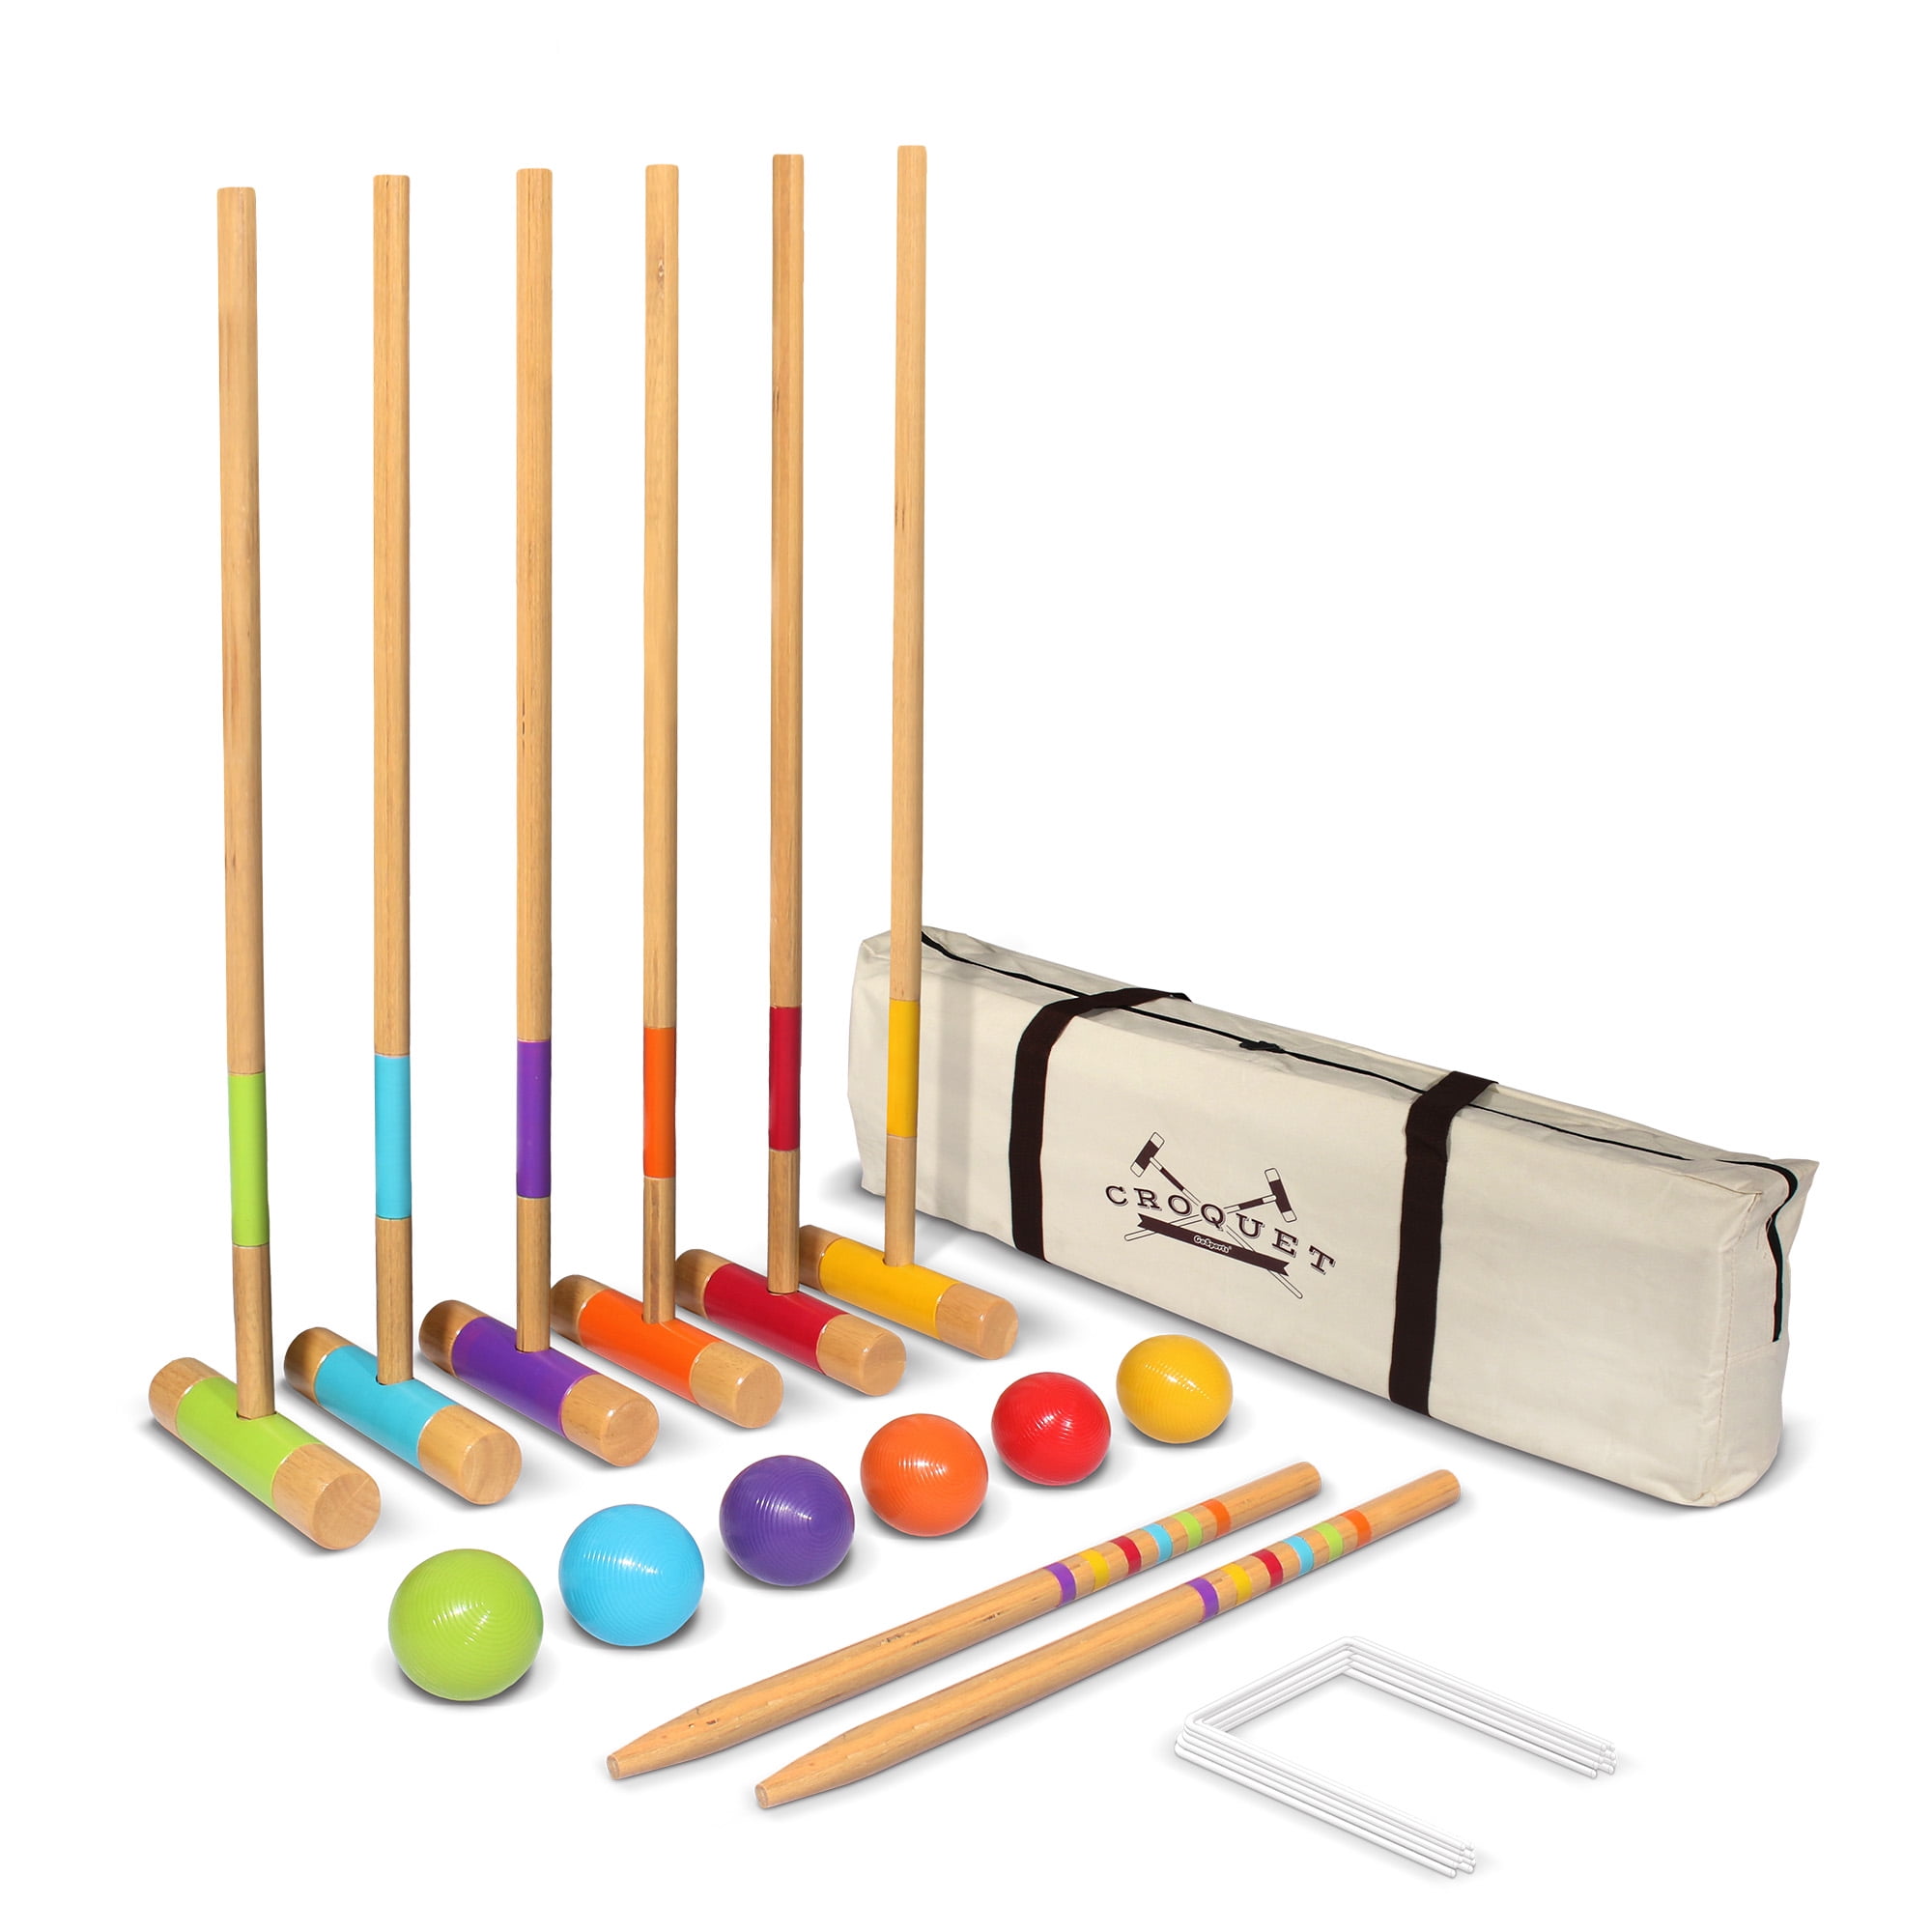 Croquet Game Set Vintage Look Outdoor Lawn Yard For Adults Kids Family Backyard 